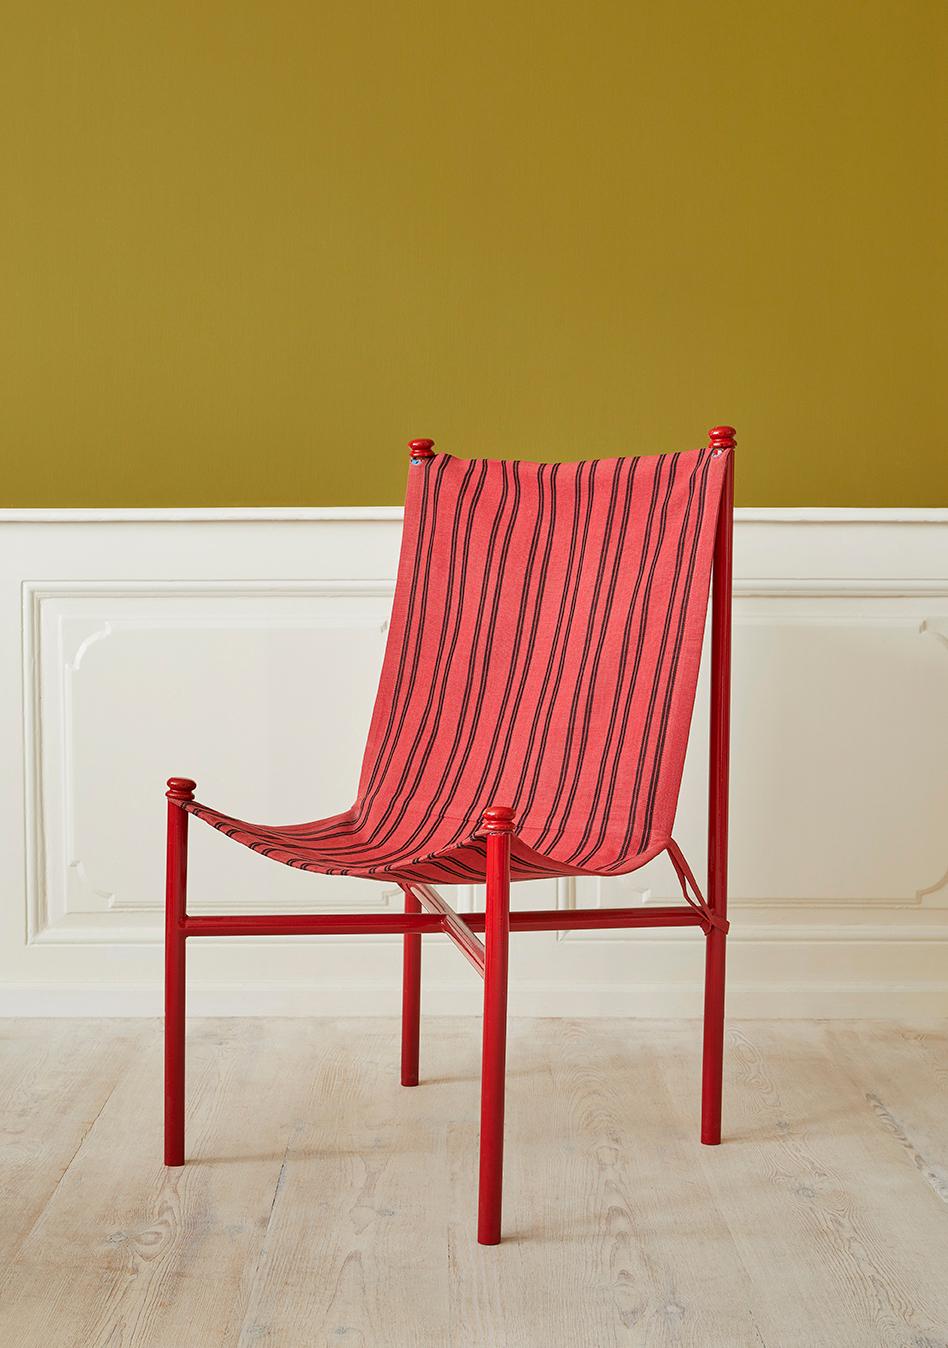 Felix Aublet
France, 1935

Chair with structure in red tubular steel and fabric seat.

H 90 x W 50 x D 50 cm